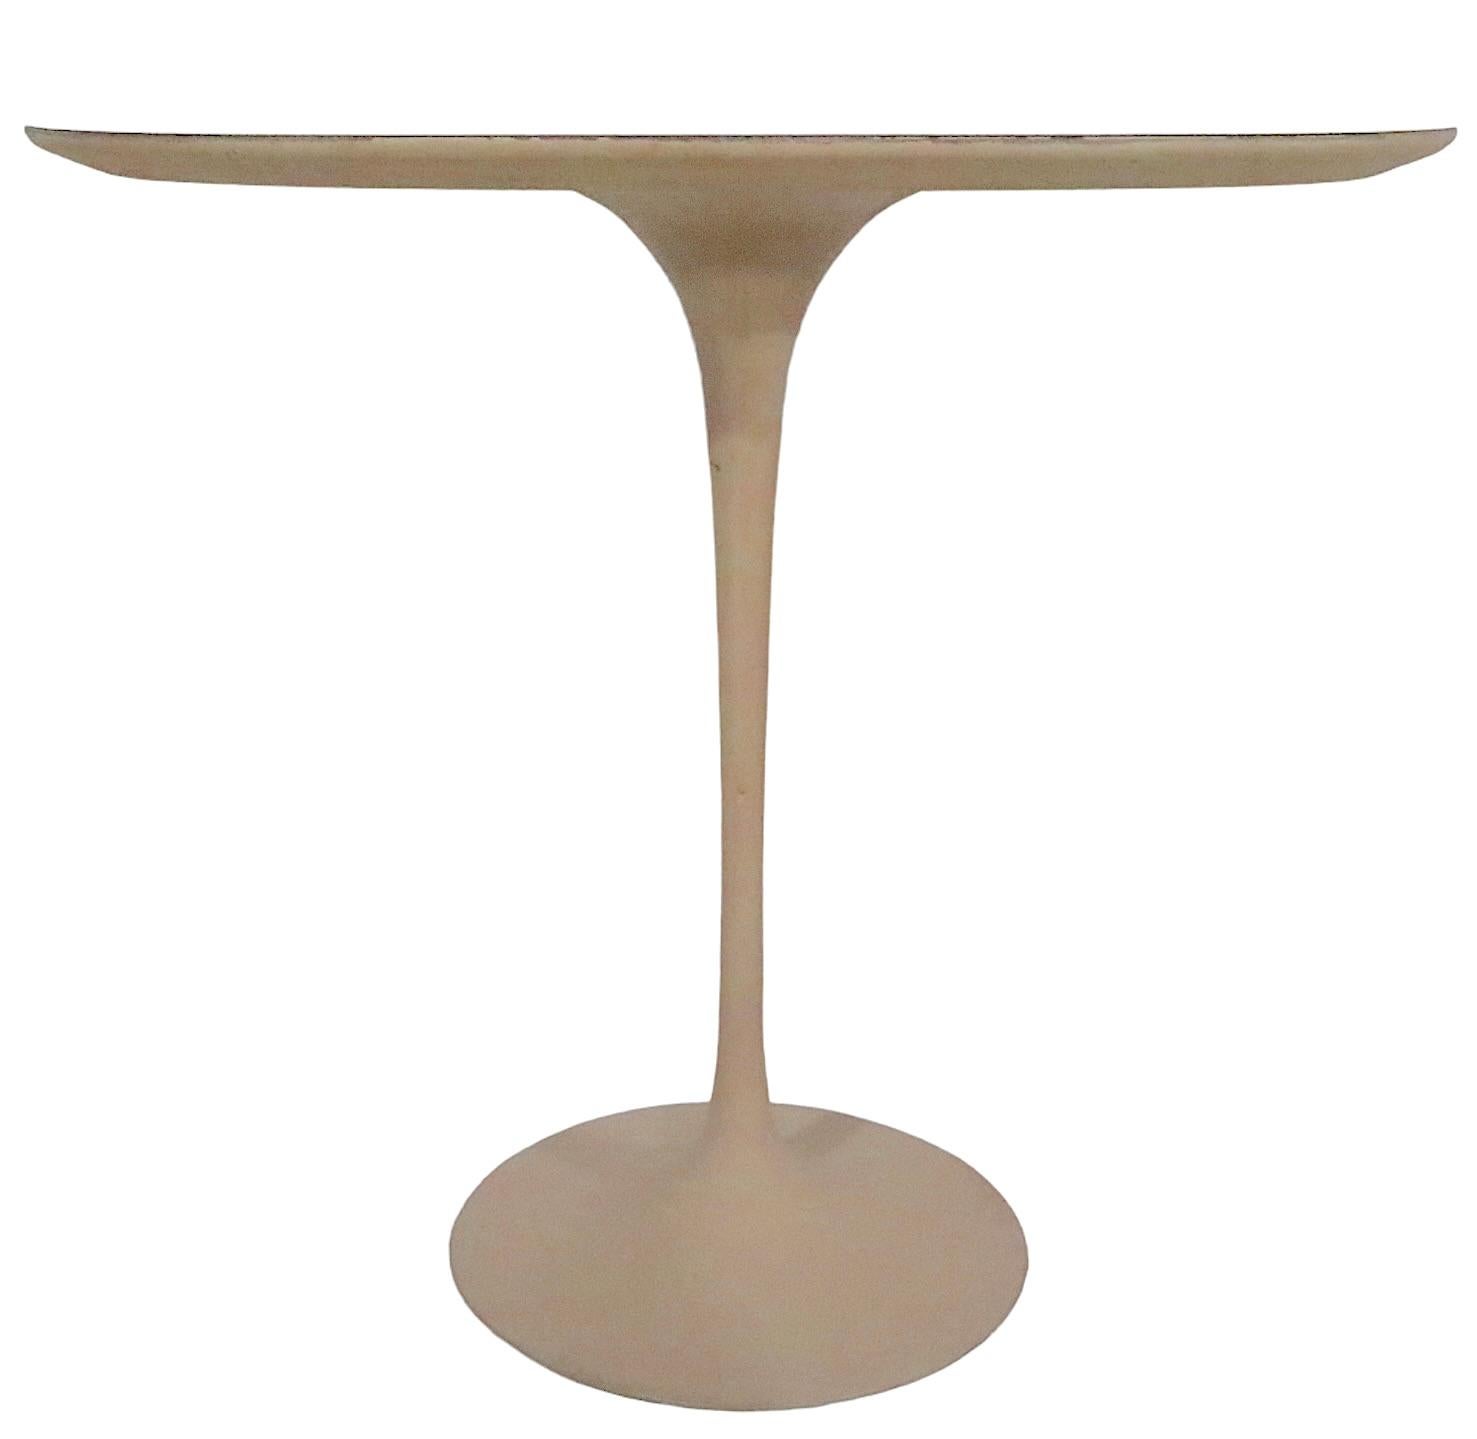 Metal Saarinen for Knoll Tulip Side Table 320 Park Ave  c 1960's For Sale